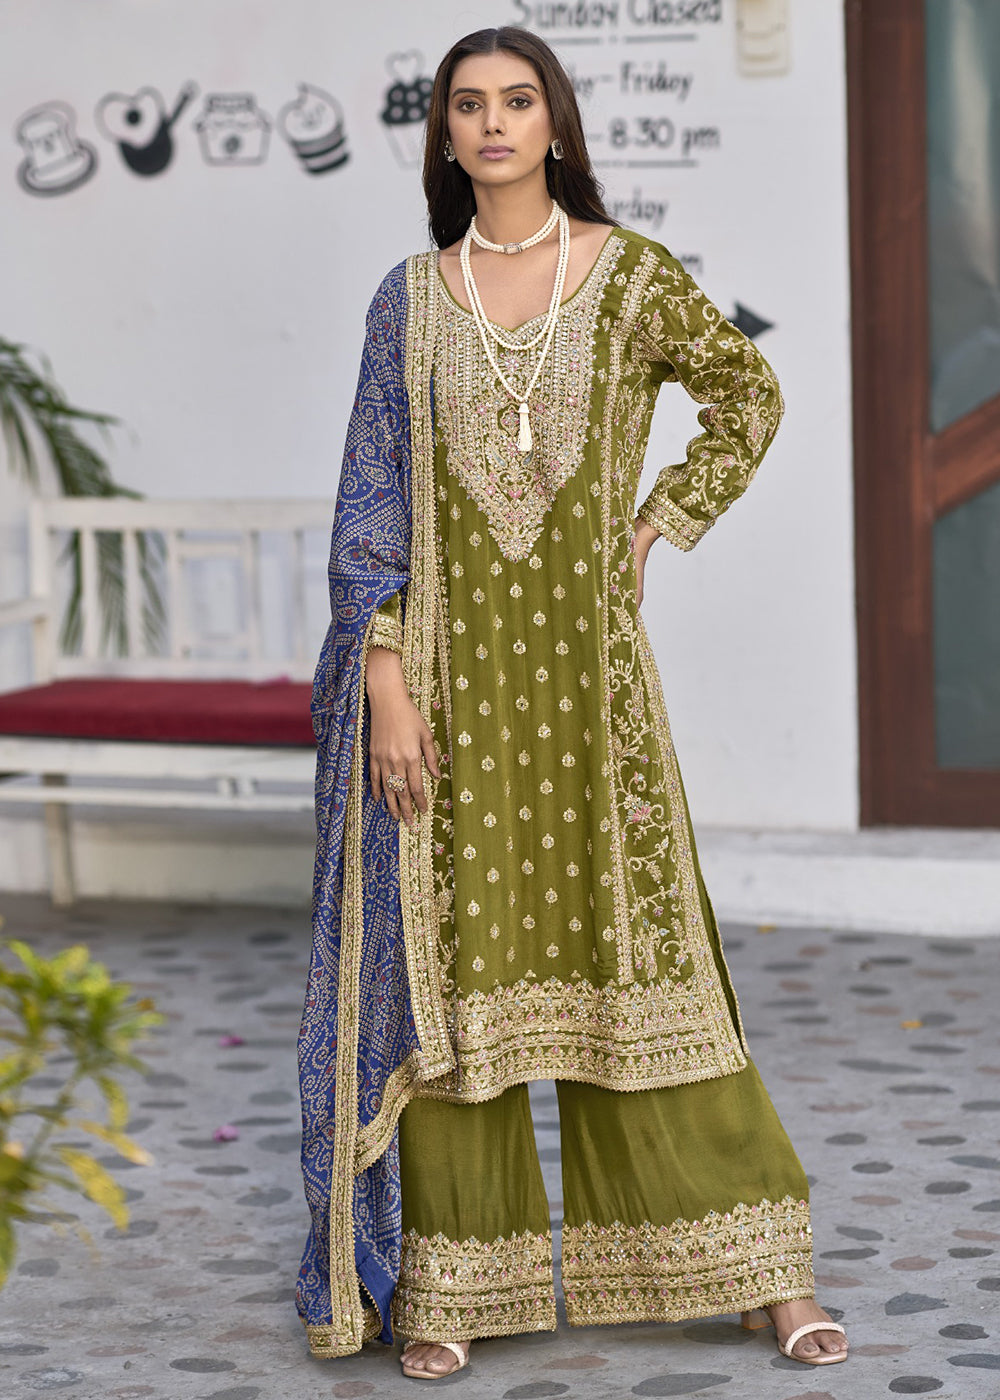 Buy Now Wedding Wear Green Palazzo Suit with Bandhej Dupatta Online in USA, UK, Canada, Germany, Australia & Worldwide at Empress Clothing.